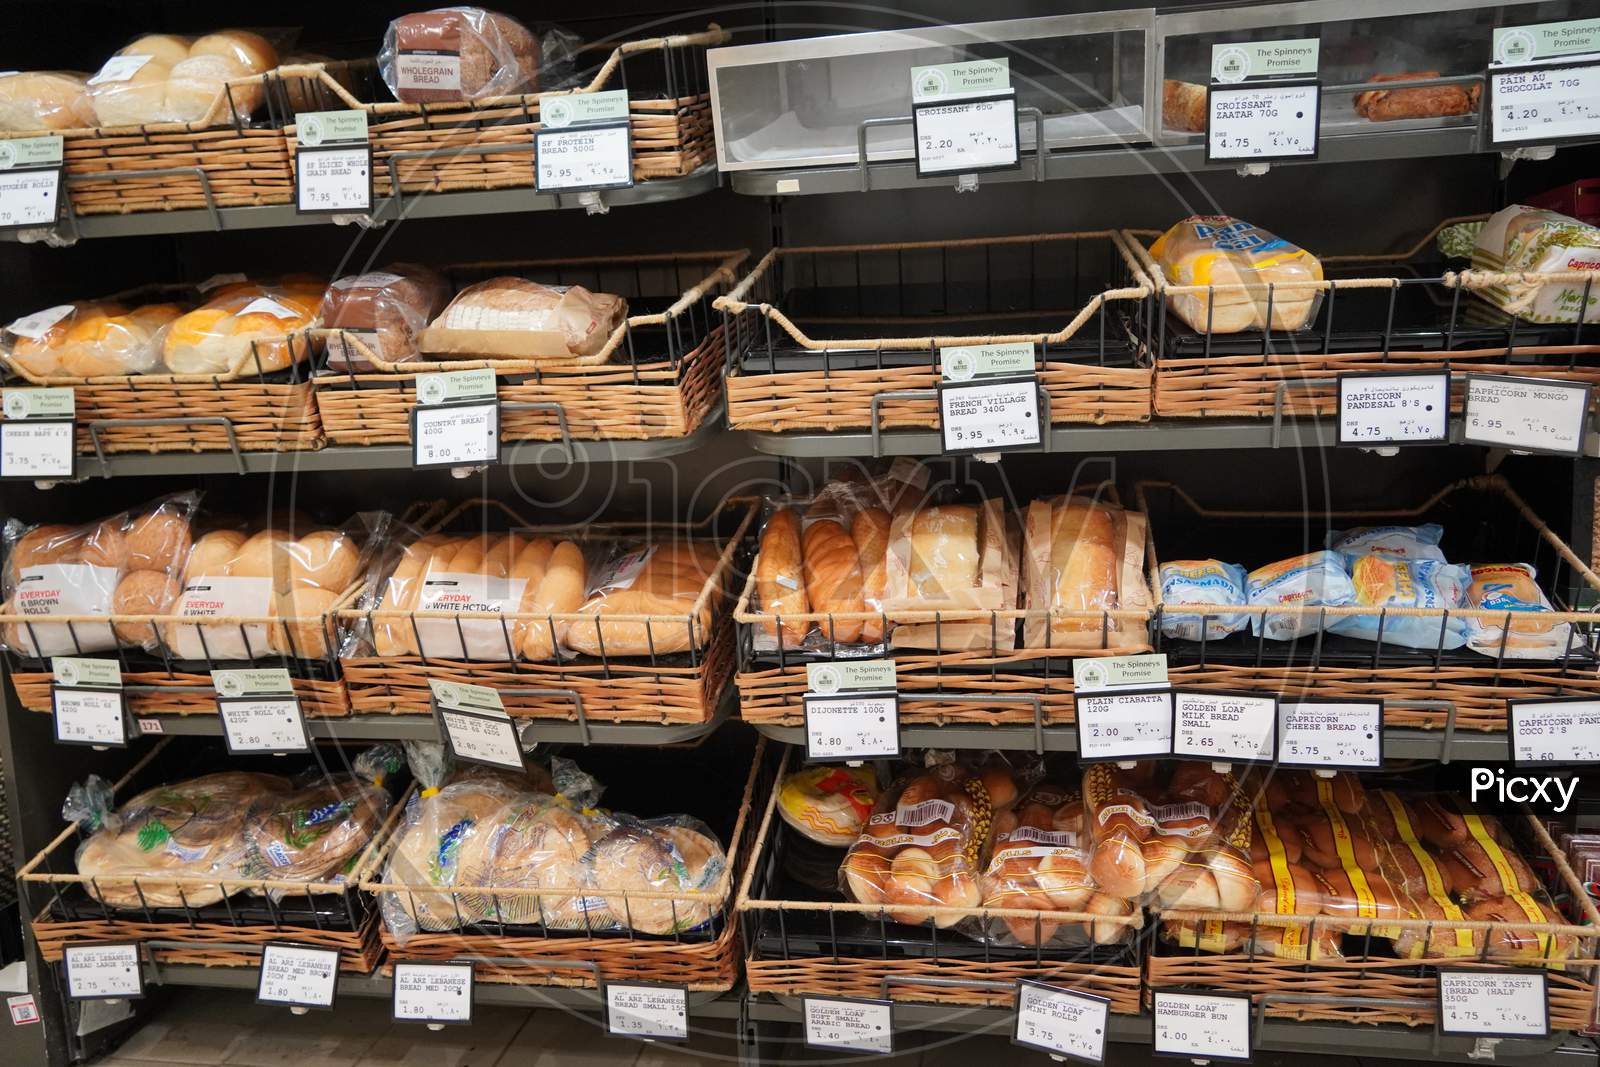 Different Fresh Bread On The Shelves In Bakery. Interior Of A Modern Grocery Store Showcasing The Bread Aisle With A Variety Of Prepackaged Breads Available.